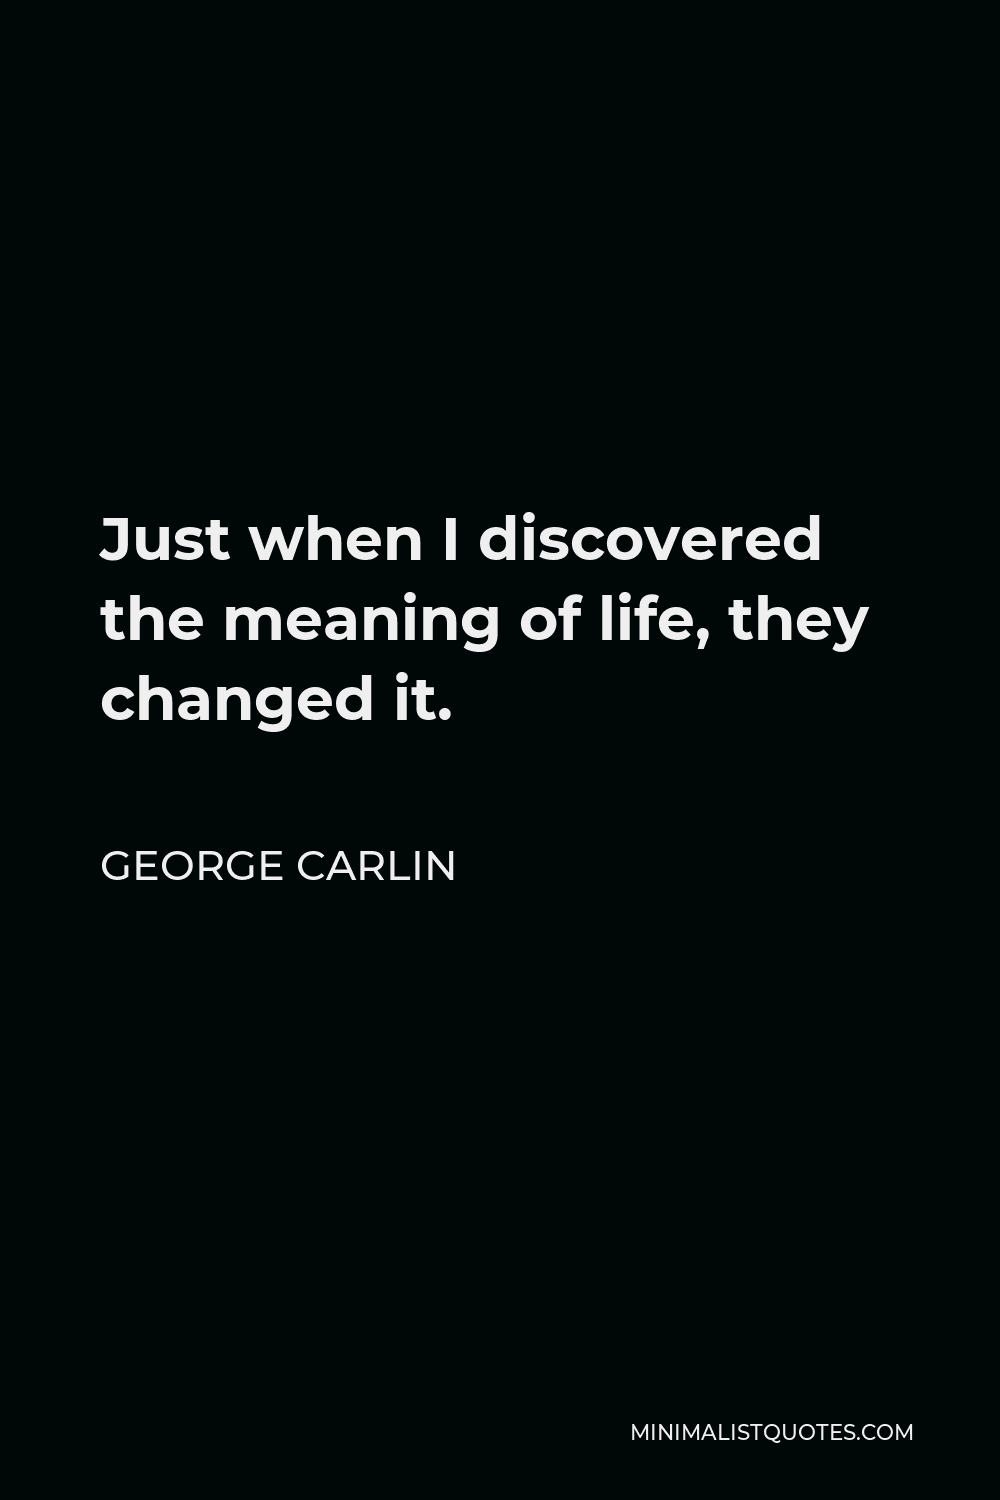 George Carlin Quote - Just when I discovered the meaning of life, they changed it.